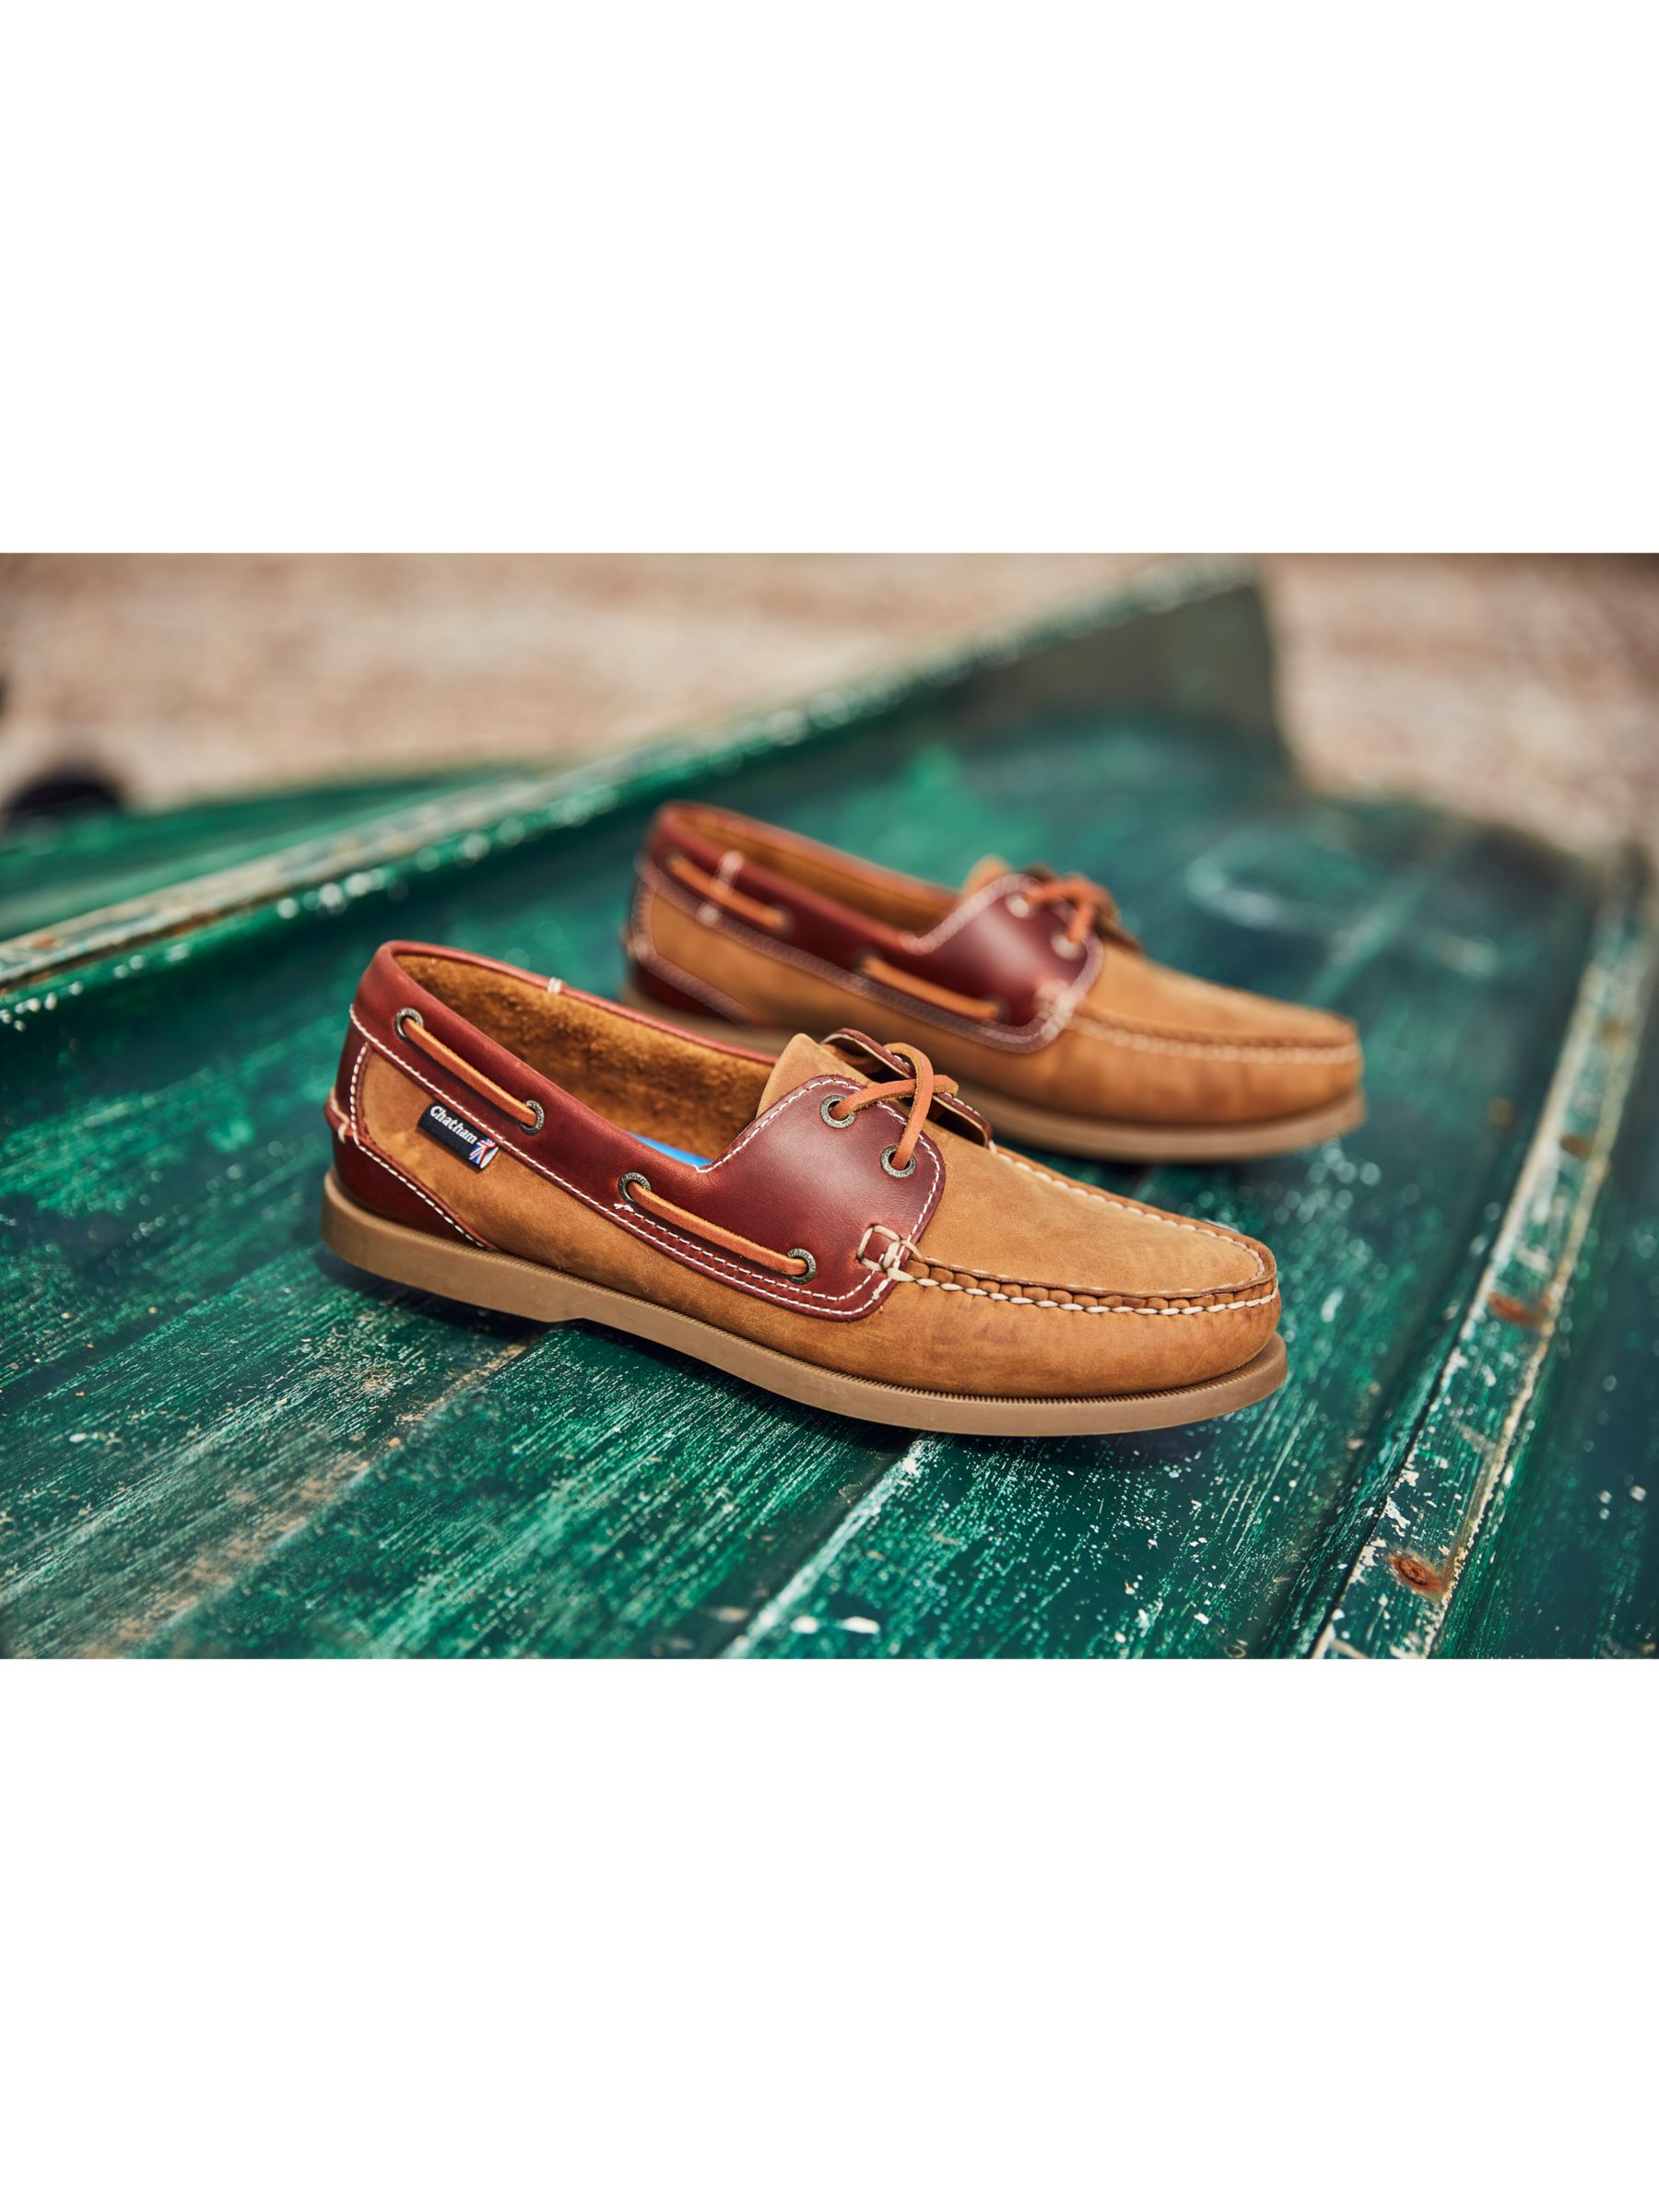 Chatham Bermuda II G2 Leather Boat Shoes, Tan at John Lewis & Partners